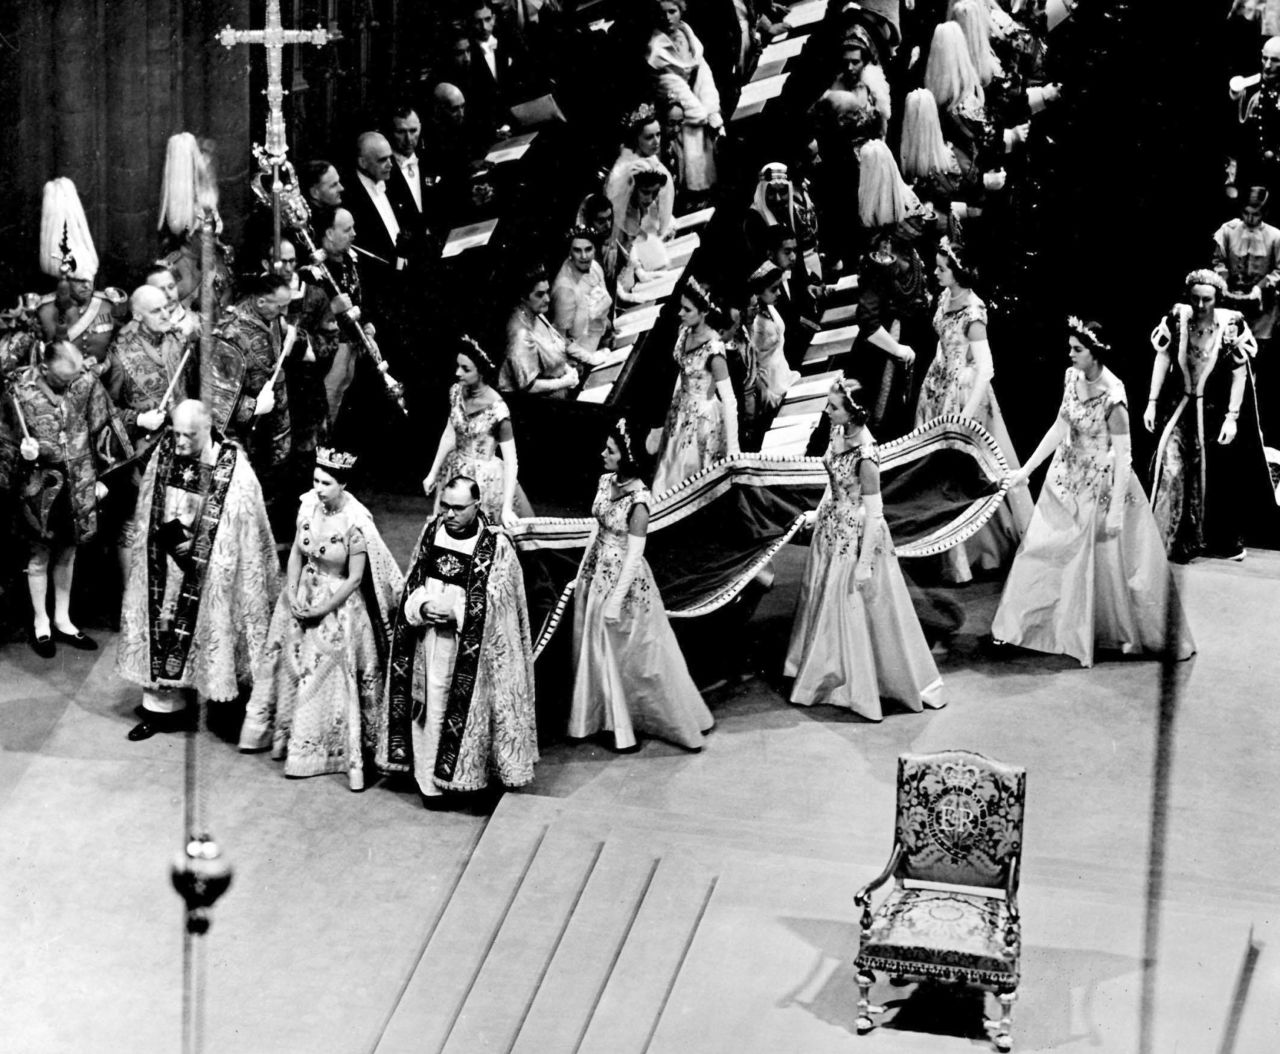 The Queen arrives at Westminster Abbey with her six maids of honor.